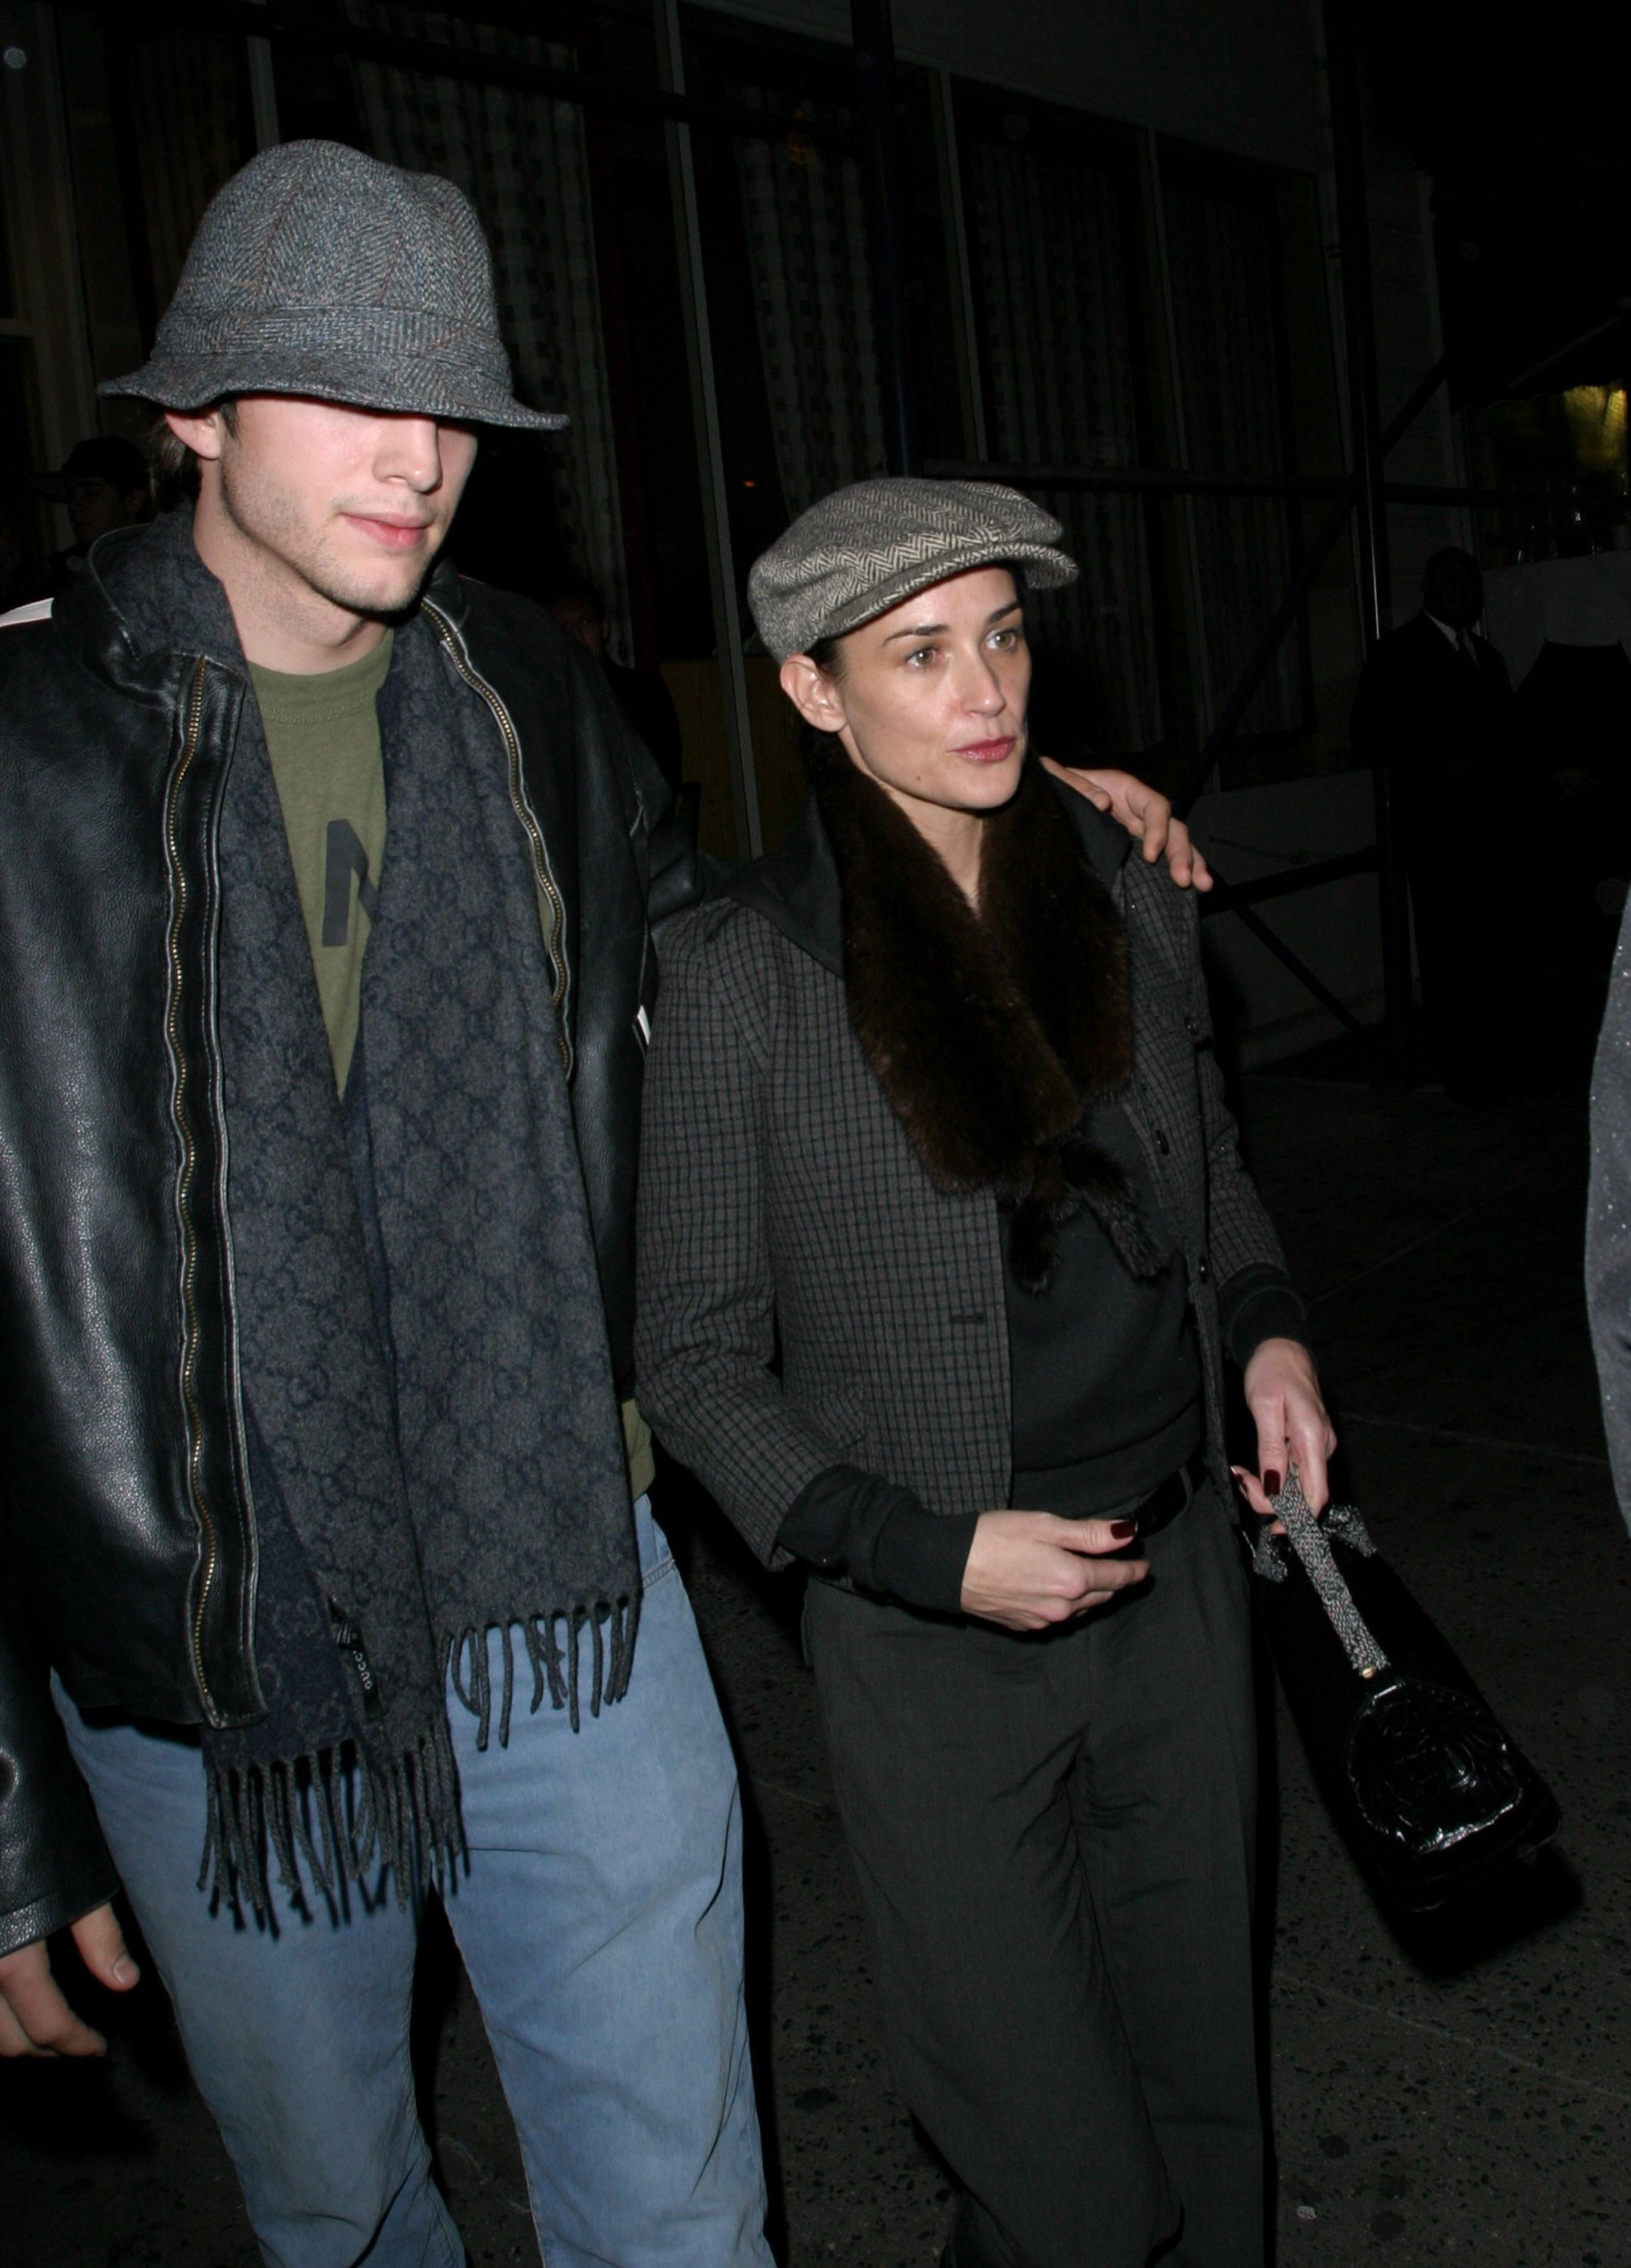 Ashton Kutcher and Demi Moore seen in New York City on October 28, 2003. | Source: Getty Images